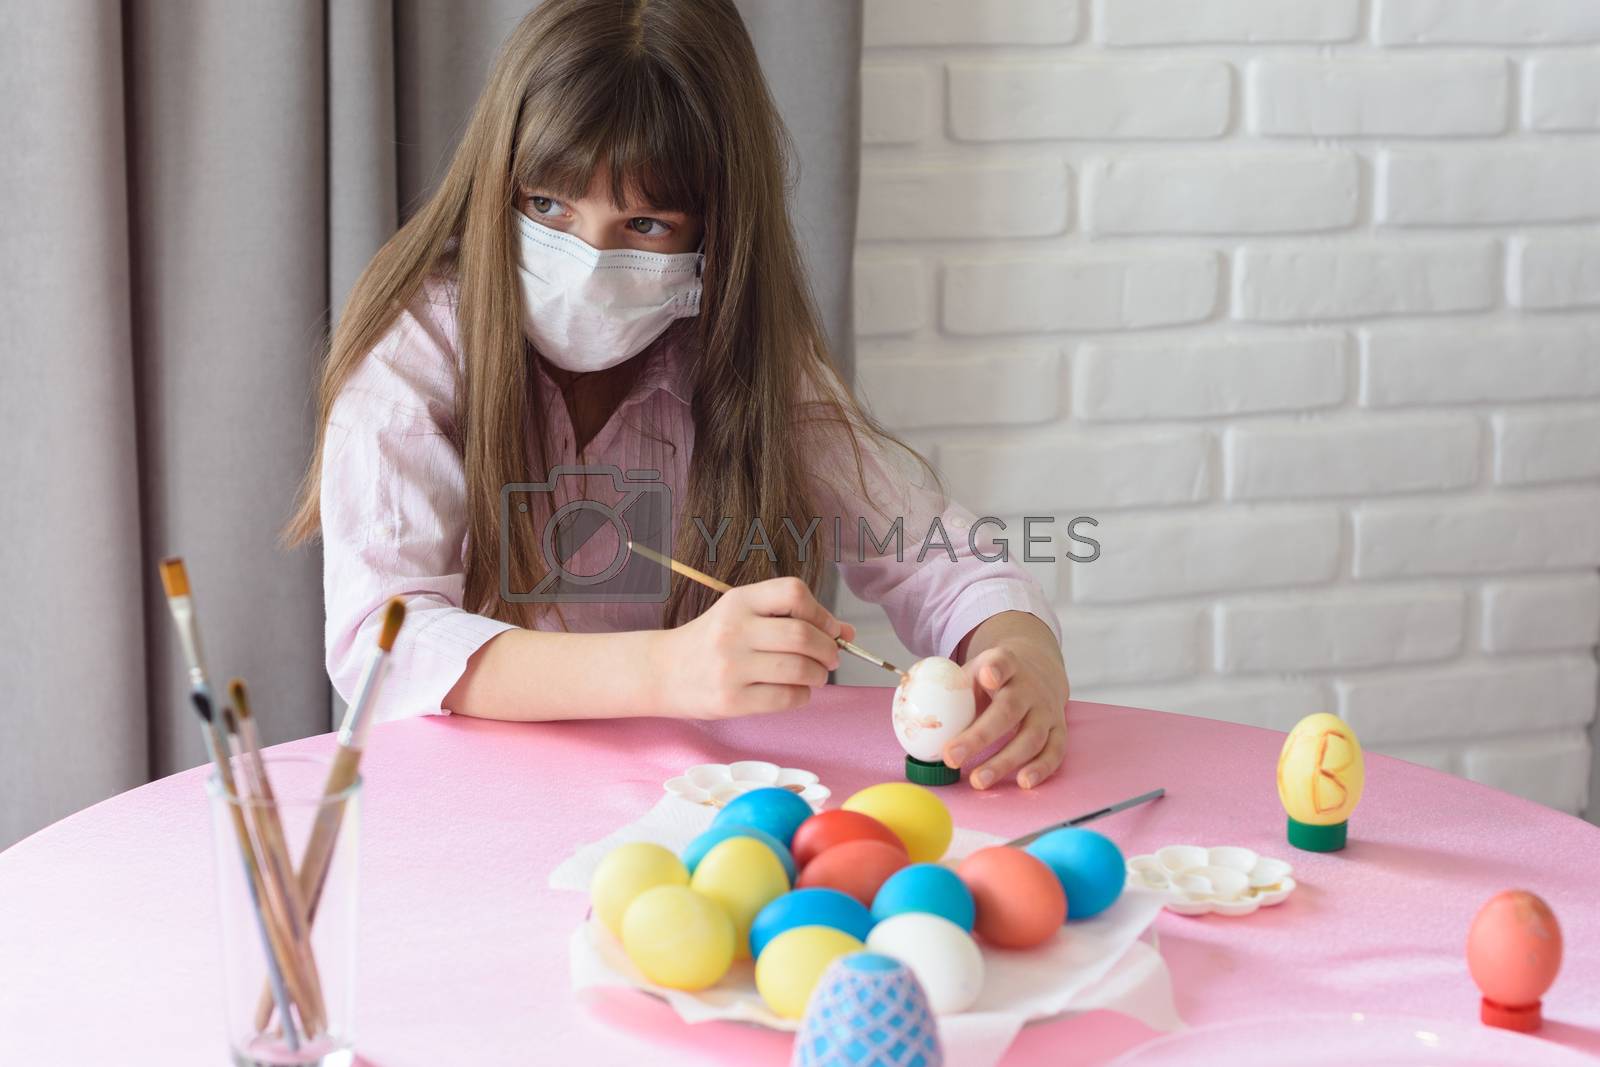 Royalty free image of Sad sick quarantined girl paints Easter eggs by Madhourse